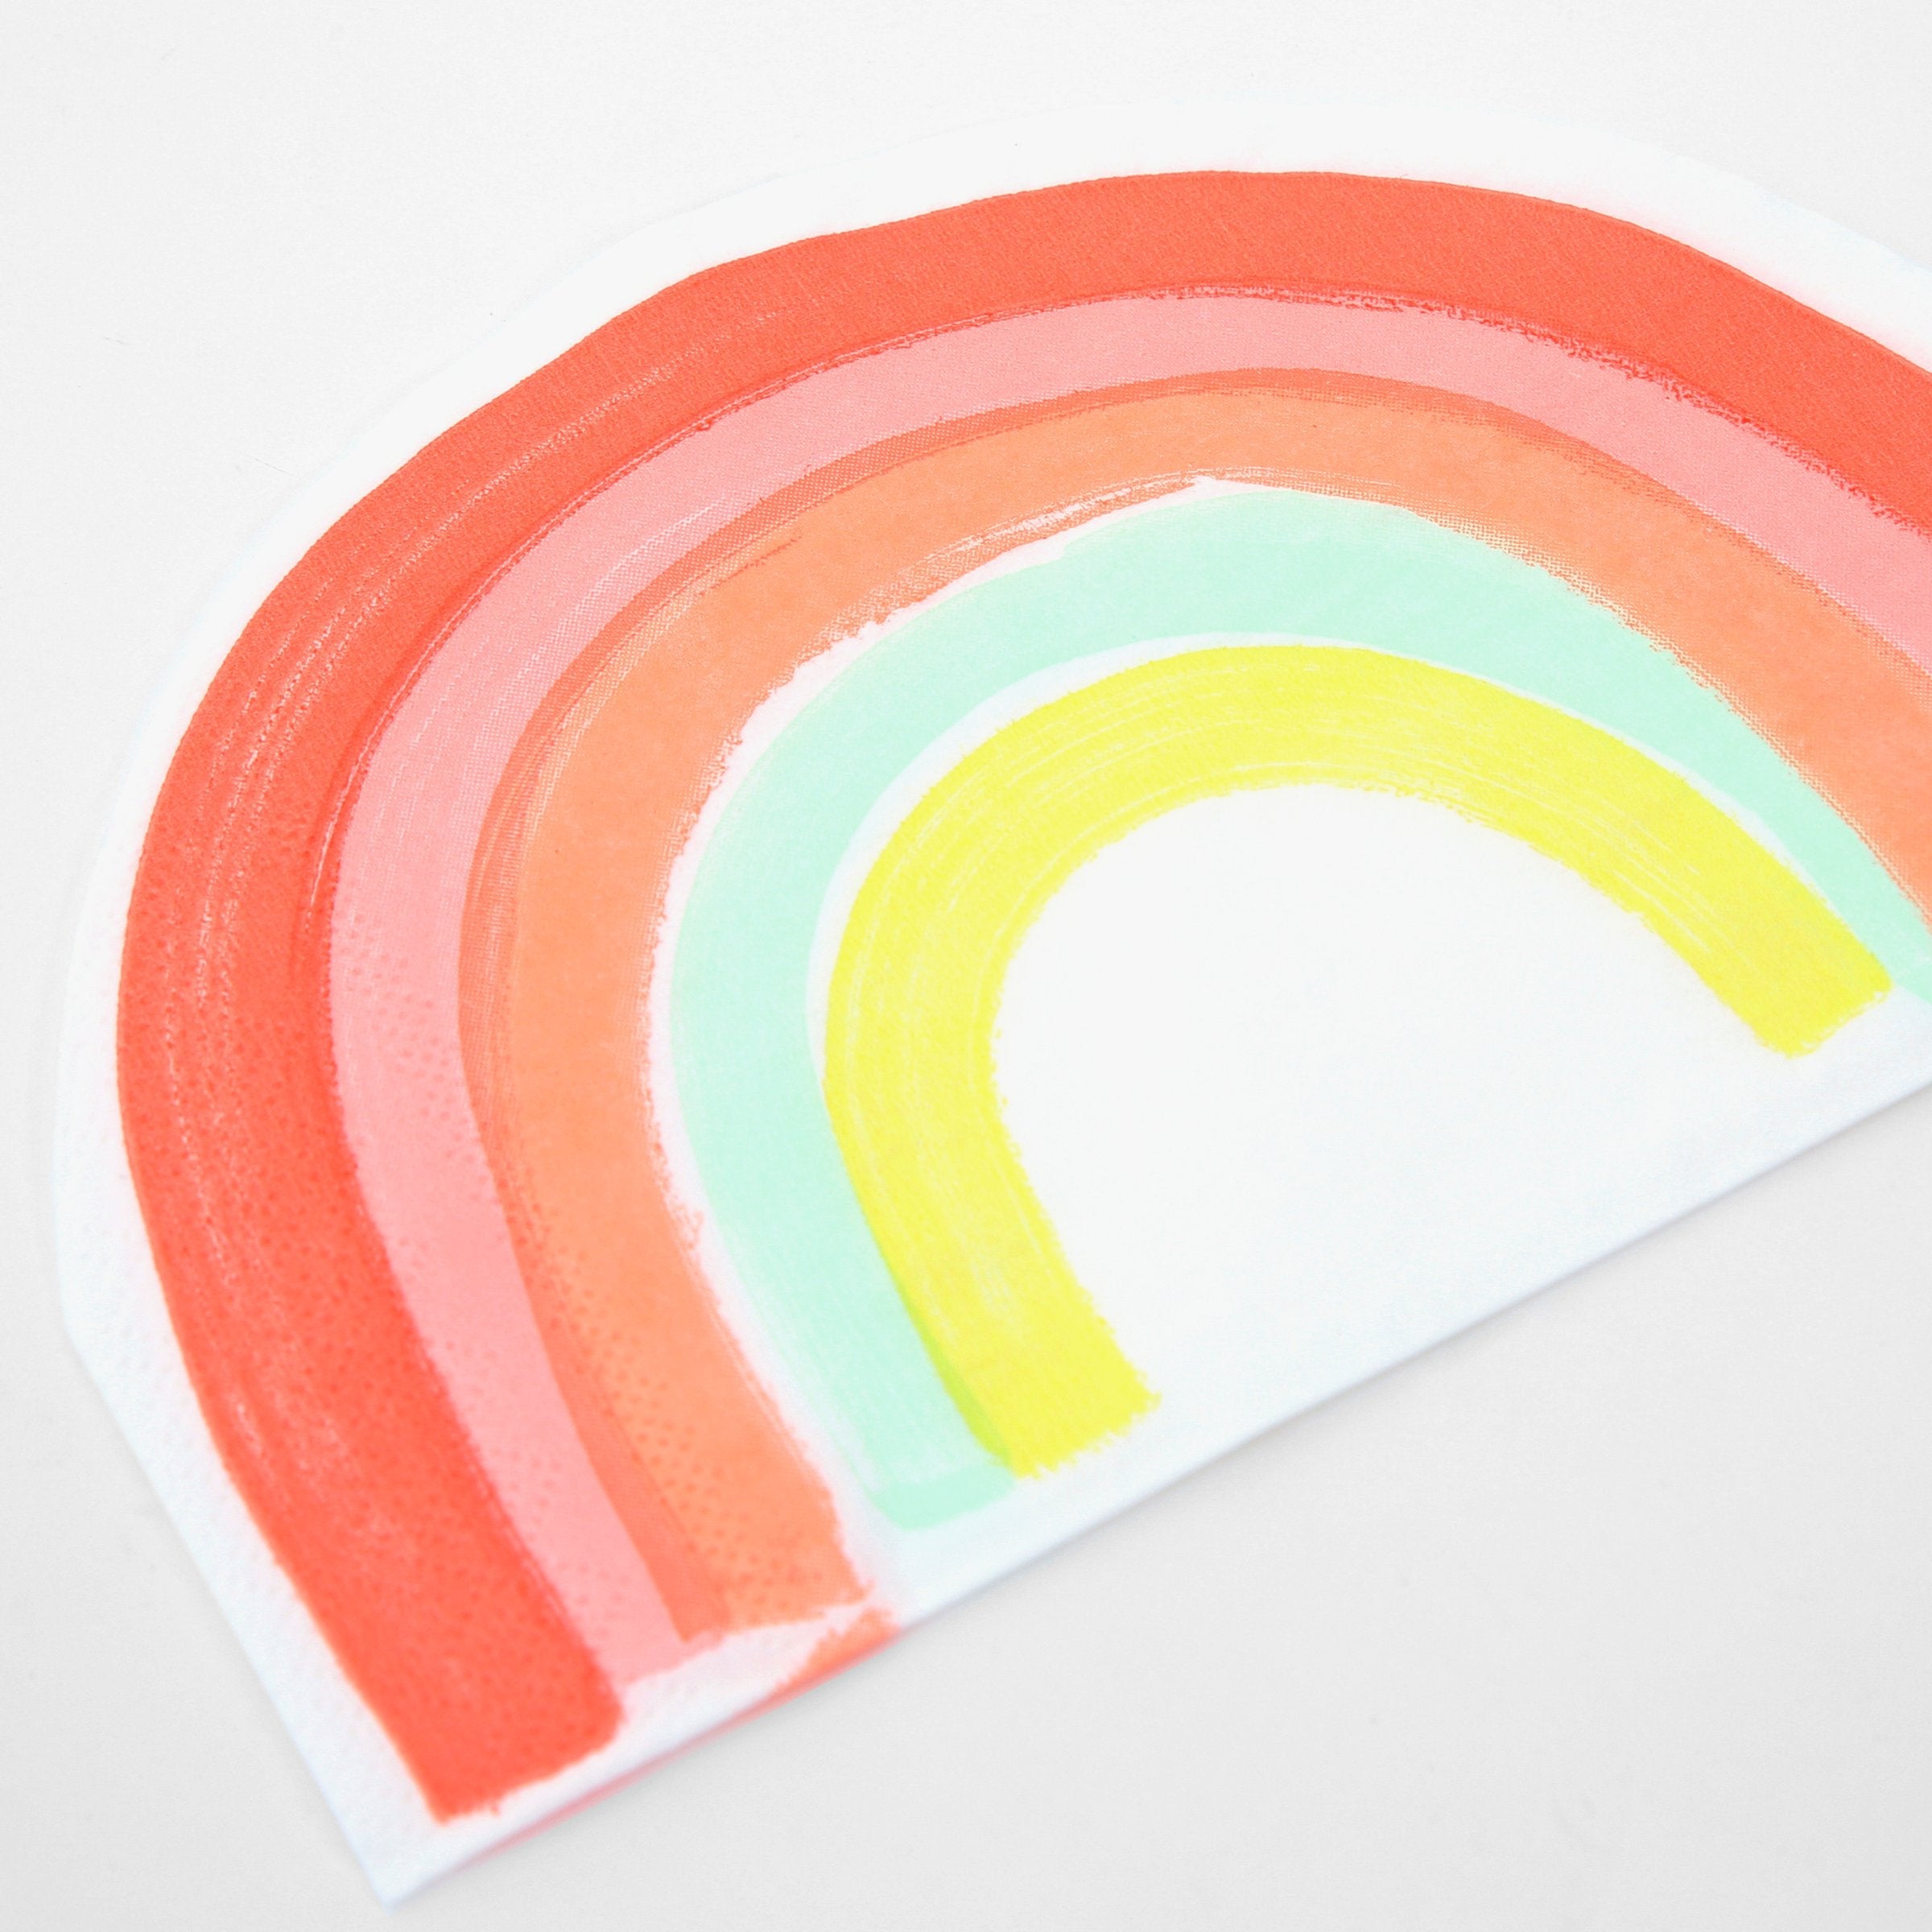 These cheerful napkins are crafted in the shape of a rainbow, with bright neon colors.